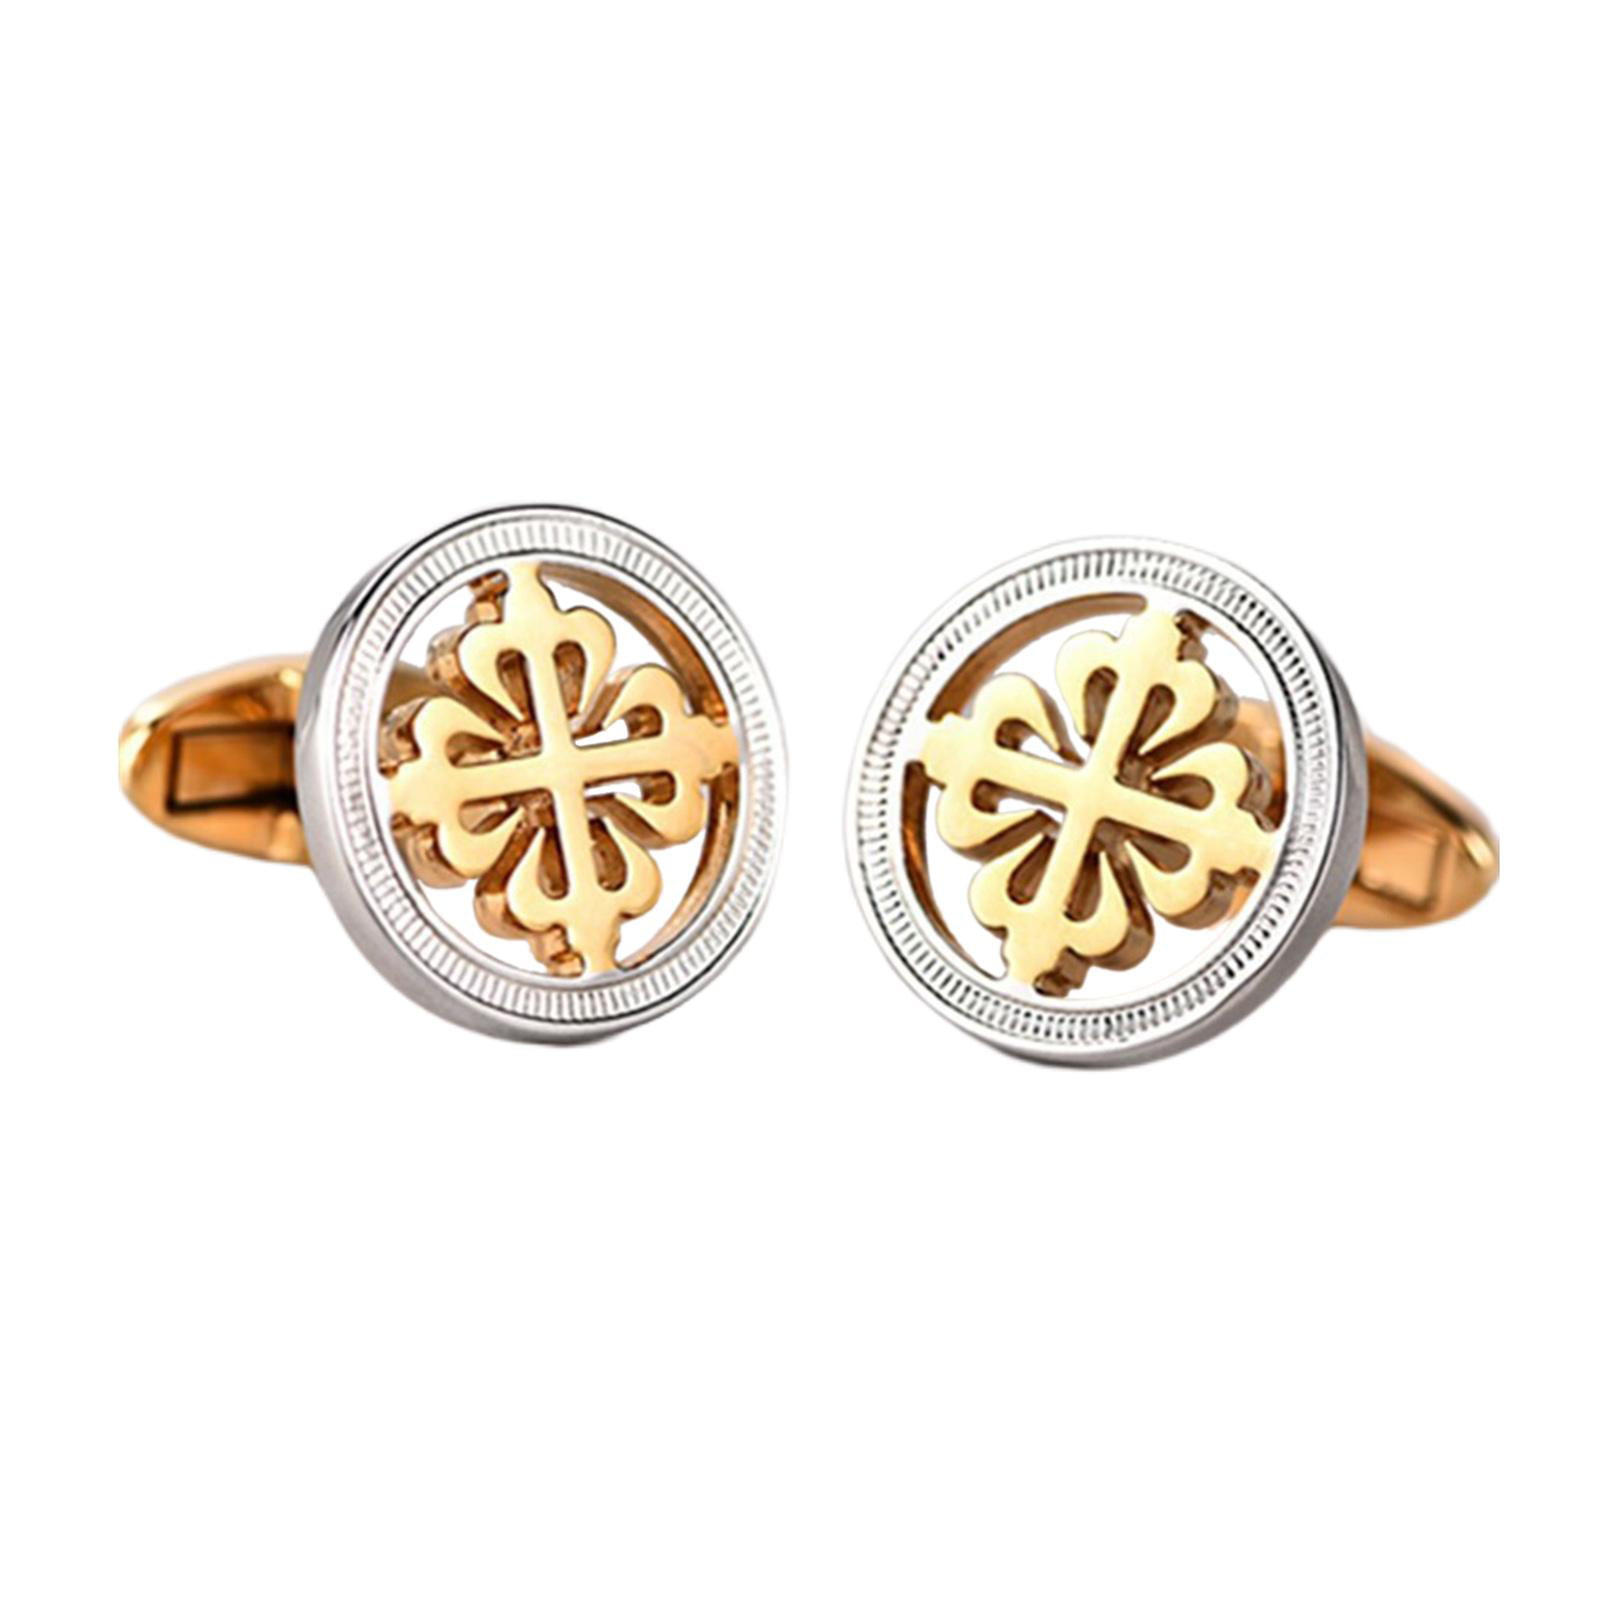 New Cocktail Cup Cufflinks Cuff links Men's Shirt Suit Unisex Jewelry Gift 